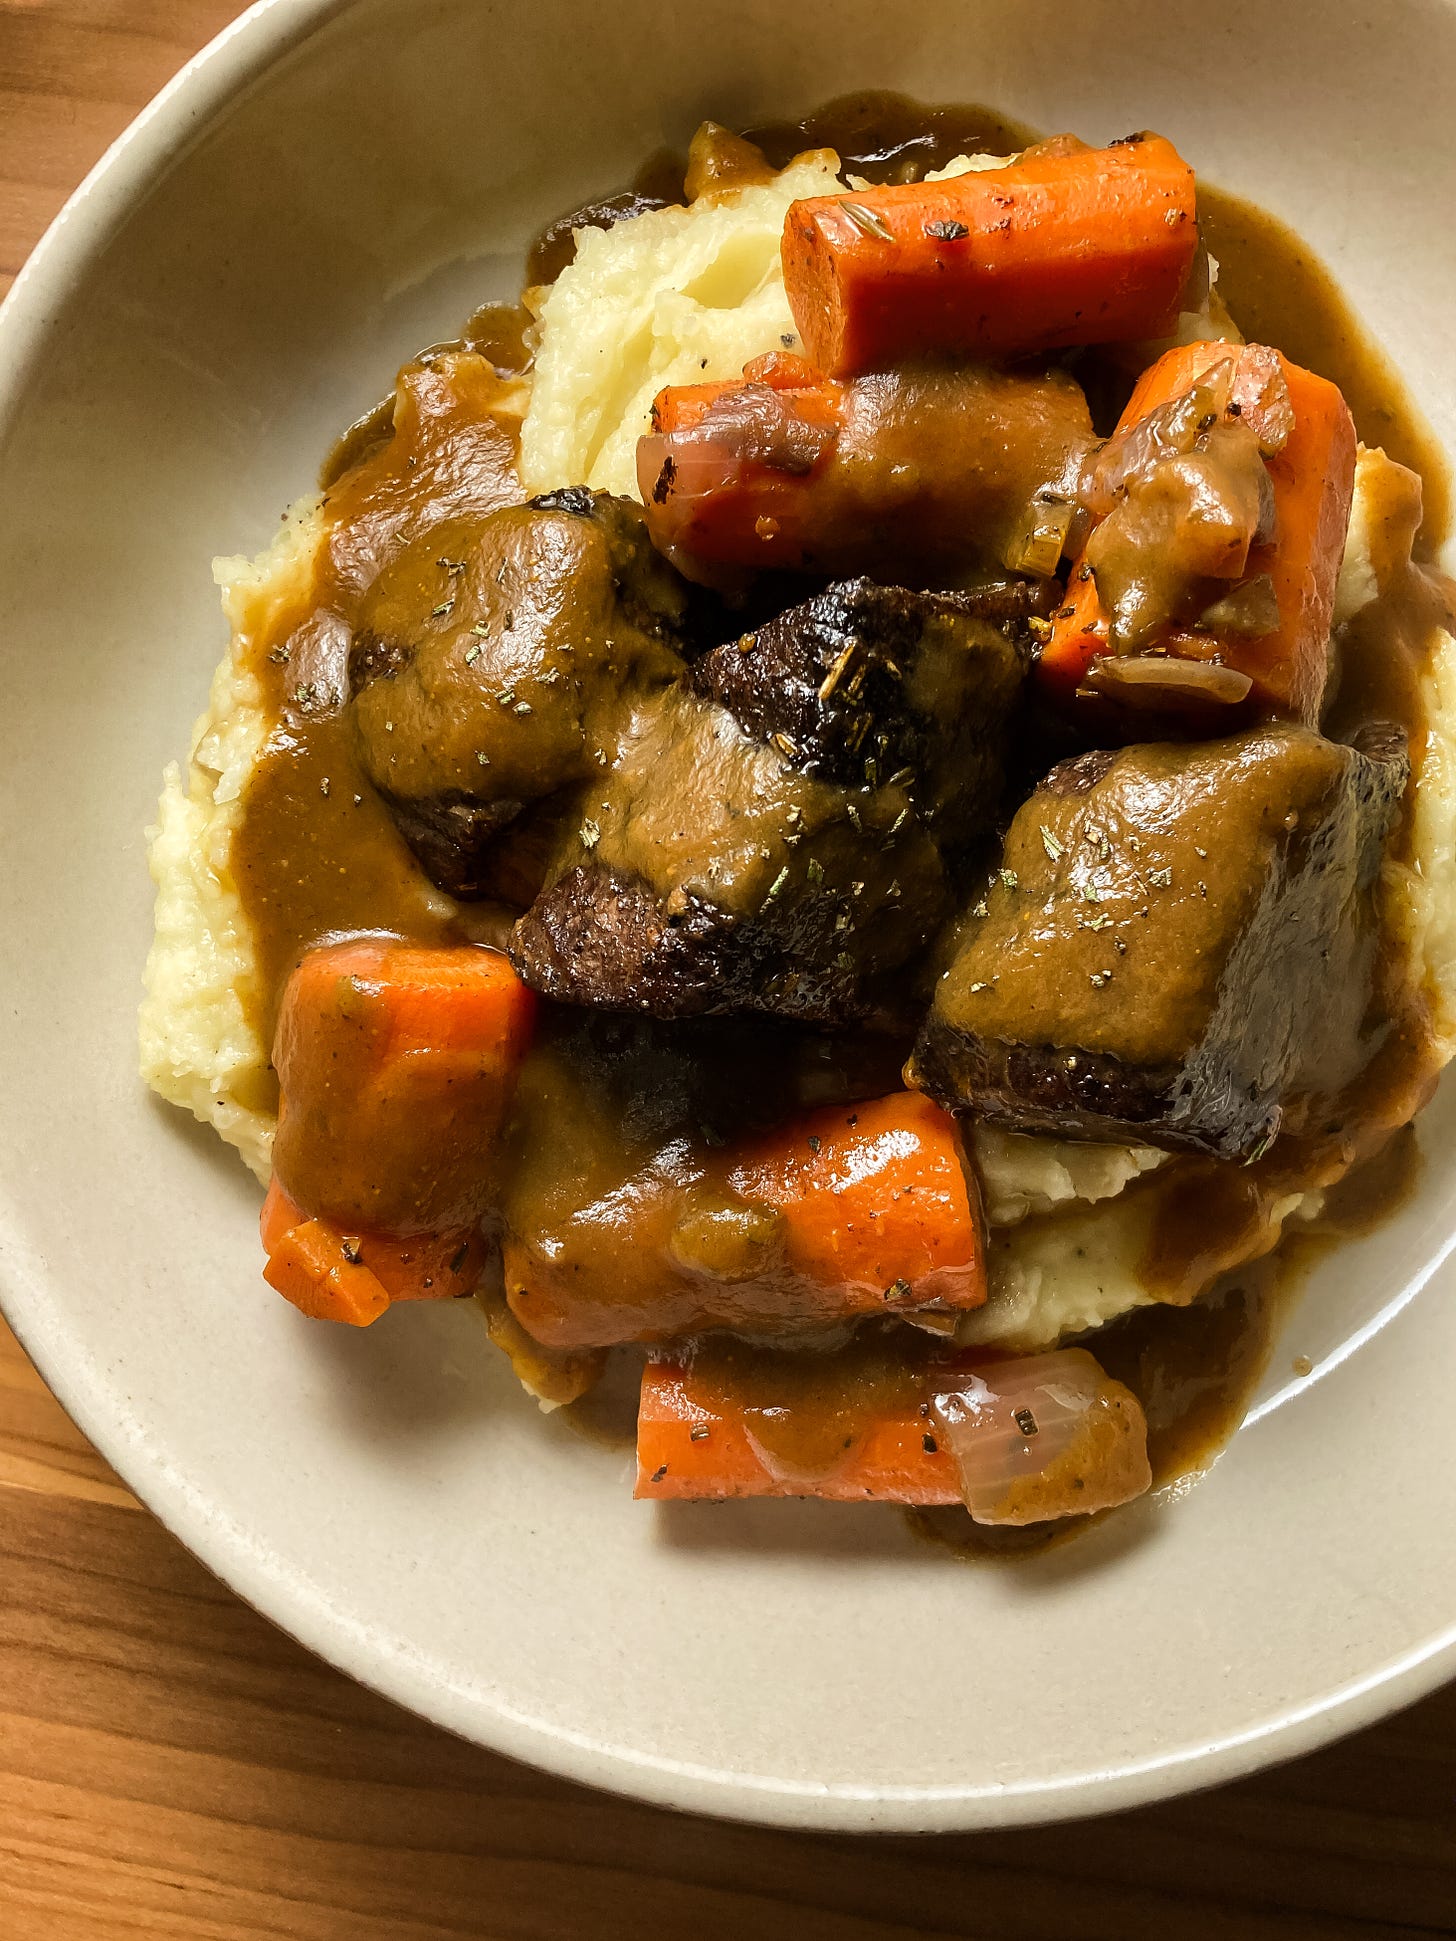 Close-up of braised short ribs and carrots over mashed potatoes, draped in gravy.